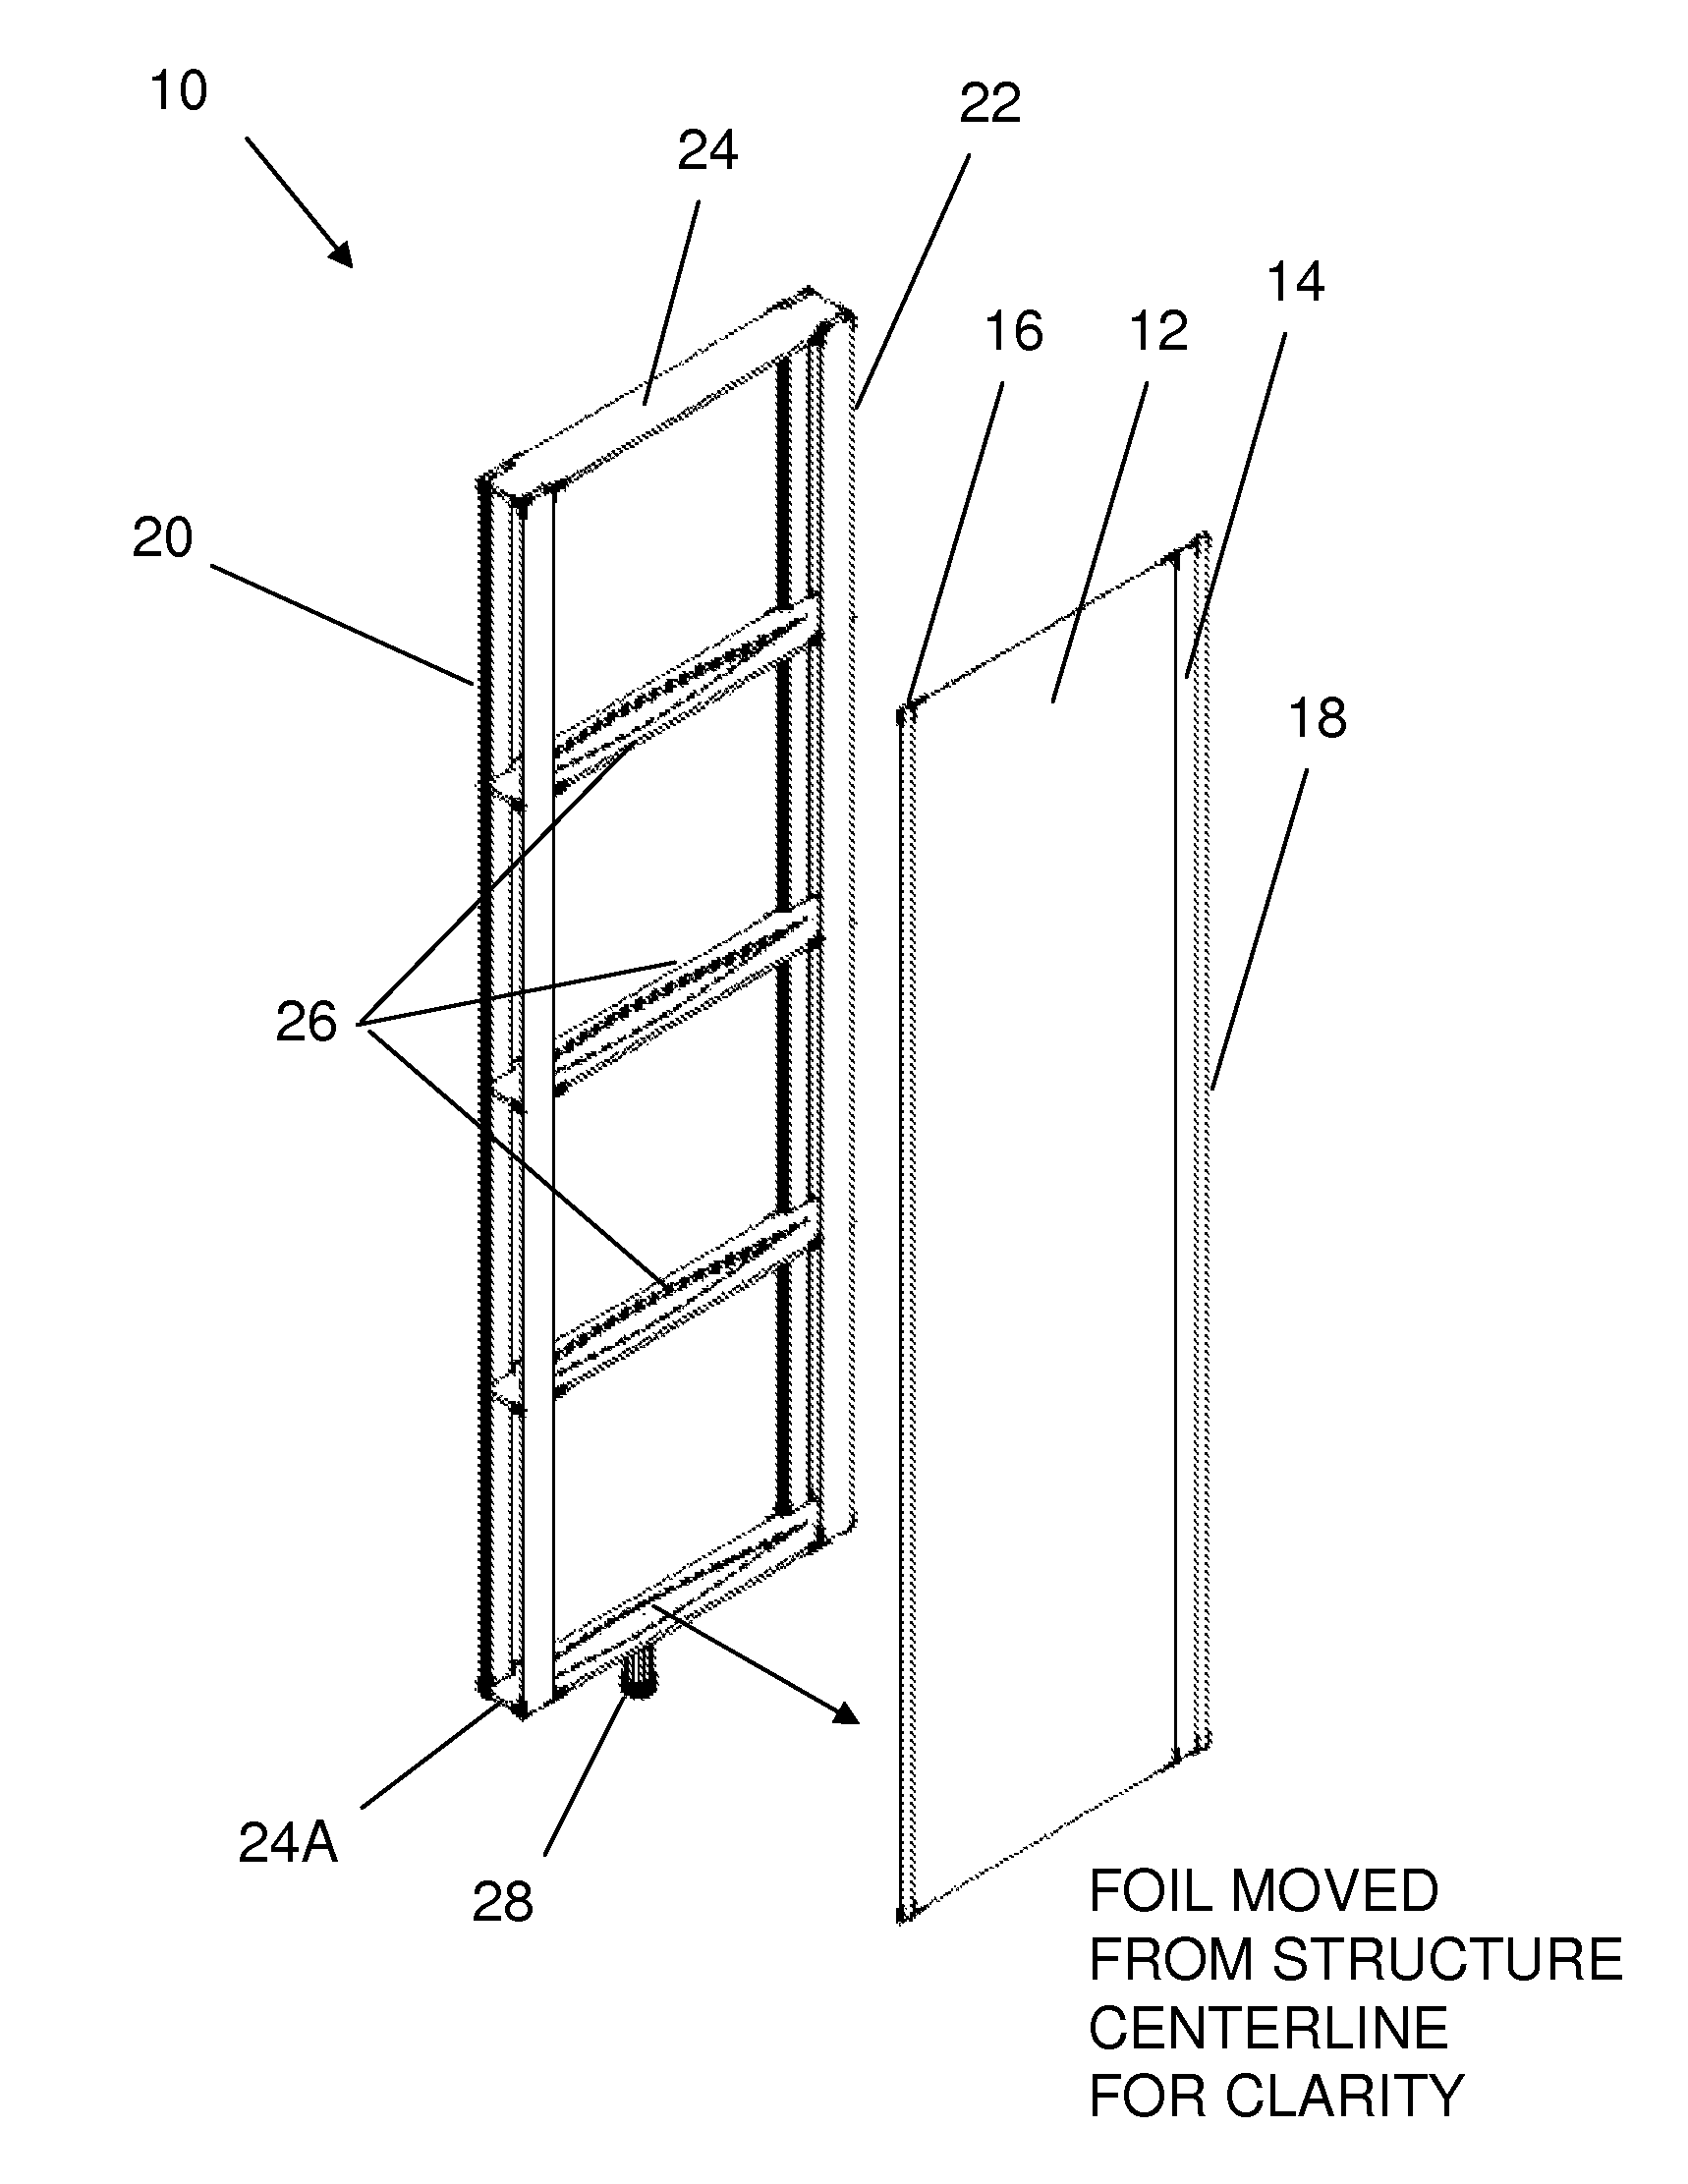 Externally supported foil with reversible camber and variable chord length